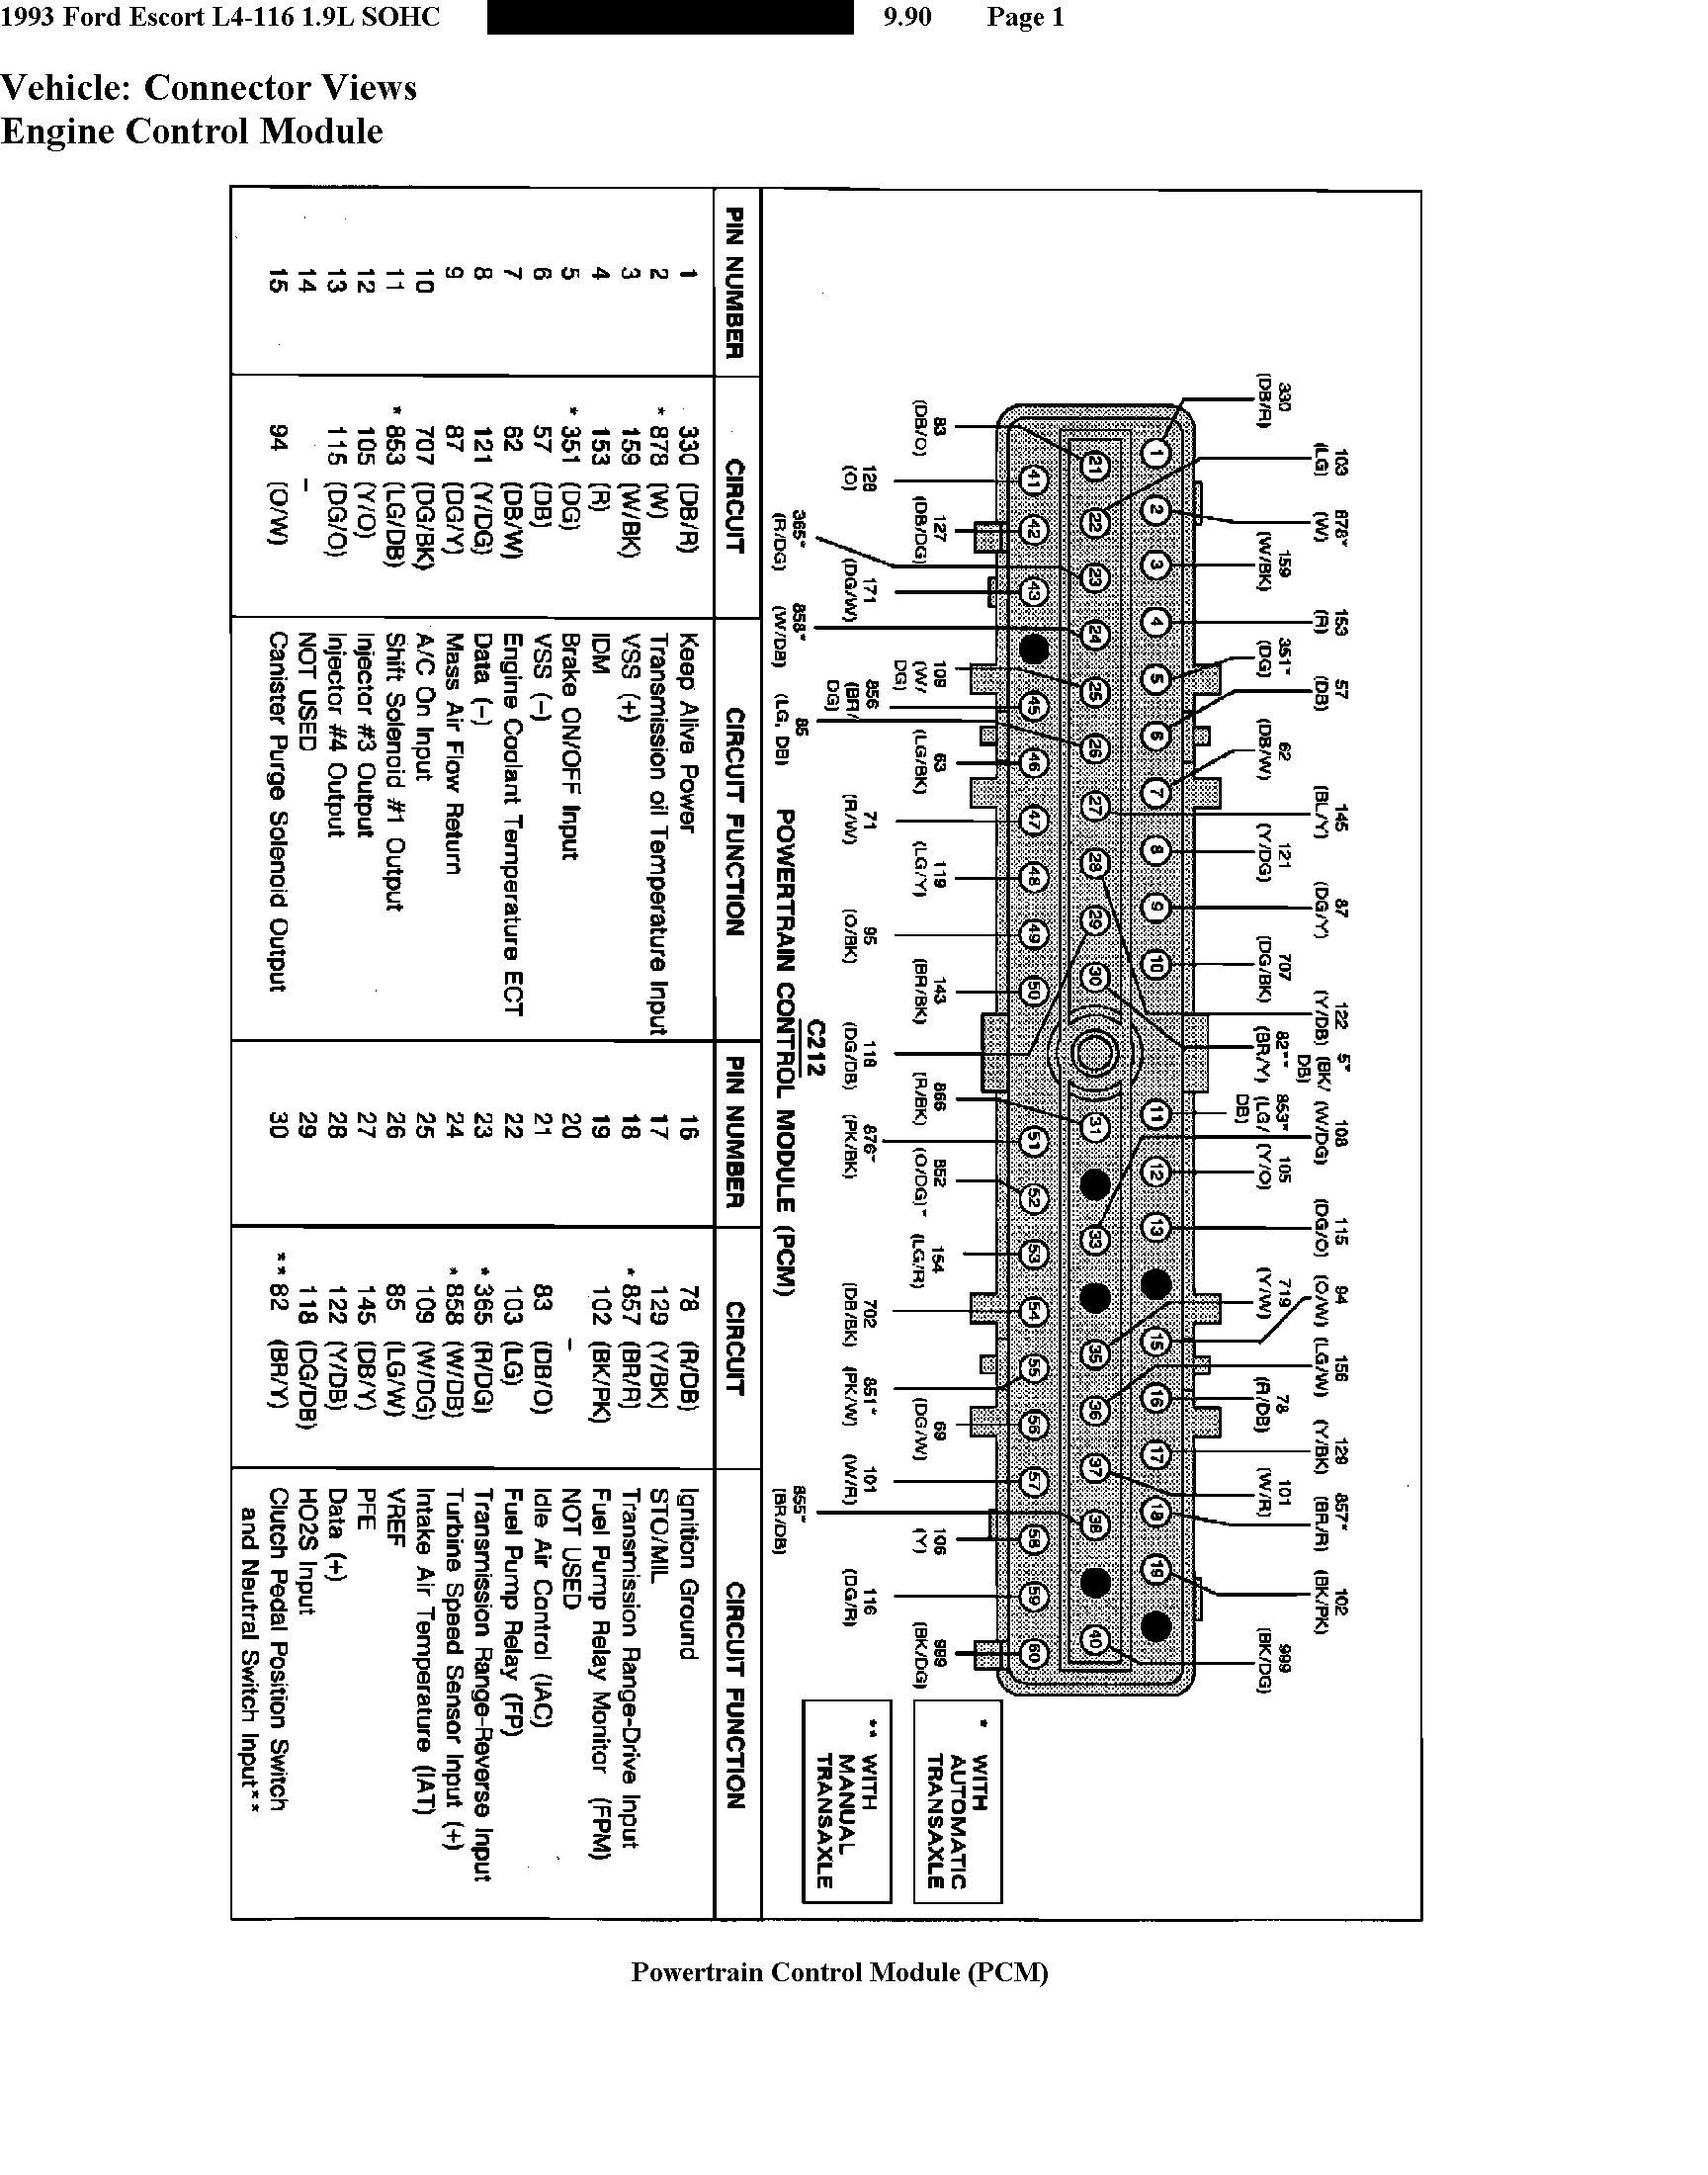 1998 ford Escort Zx2 Engine Diagram Category Wiring 0 Of 1998 ford Escort Zx2 Engine Diagram